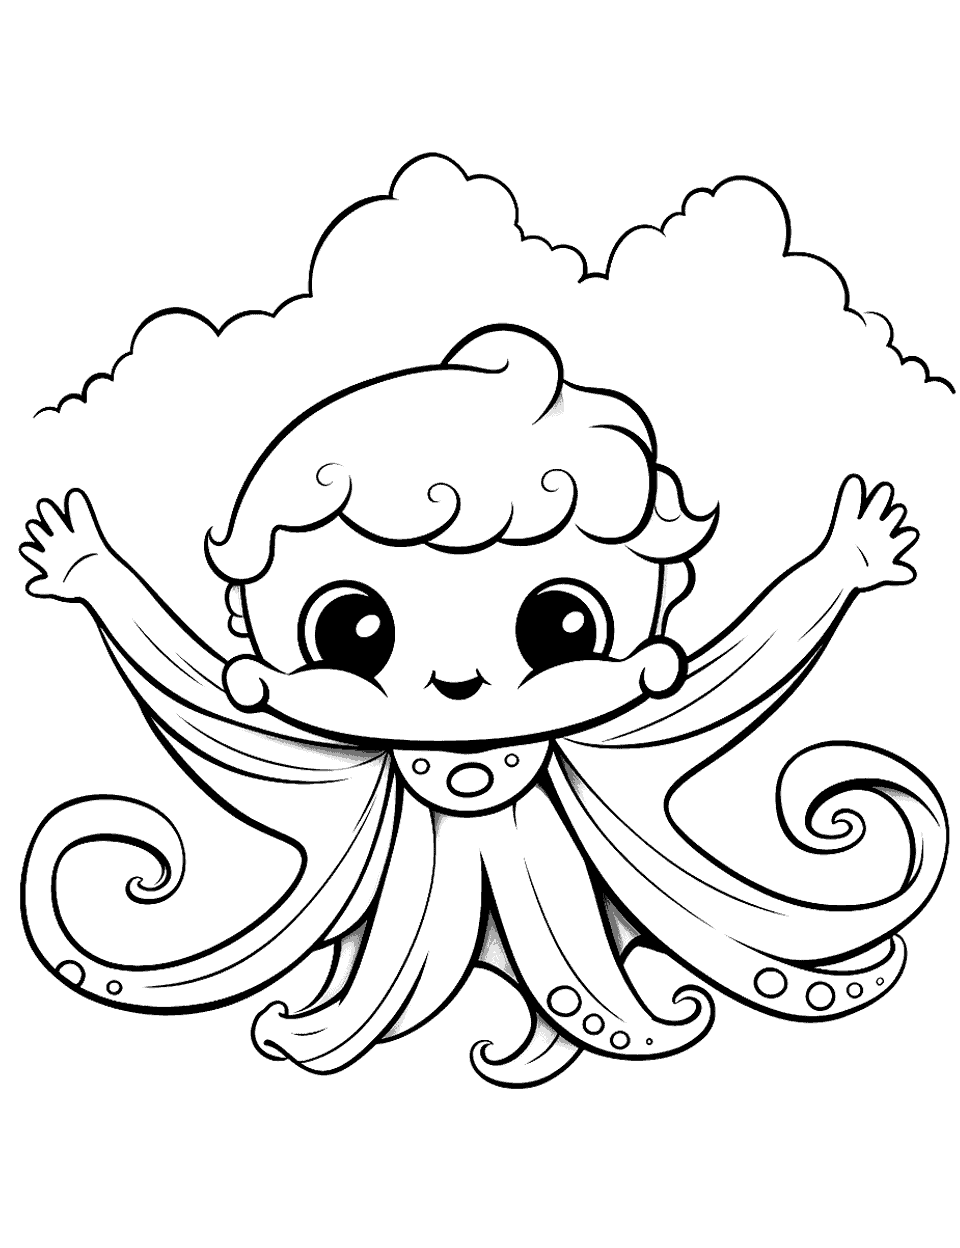 Superhero Octopus Saving the Day Coloring Page - An octopus dressed as a superhero, flying through the sky.